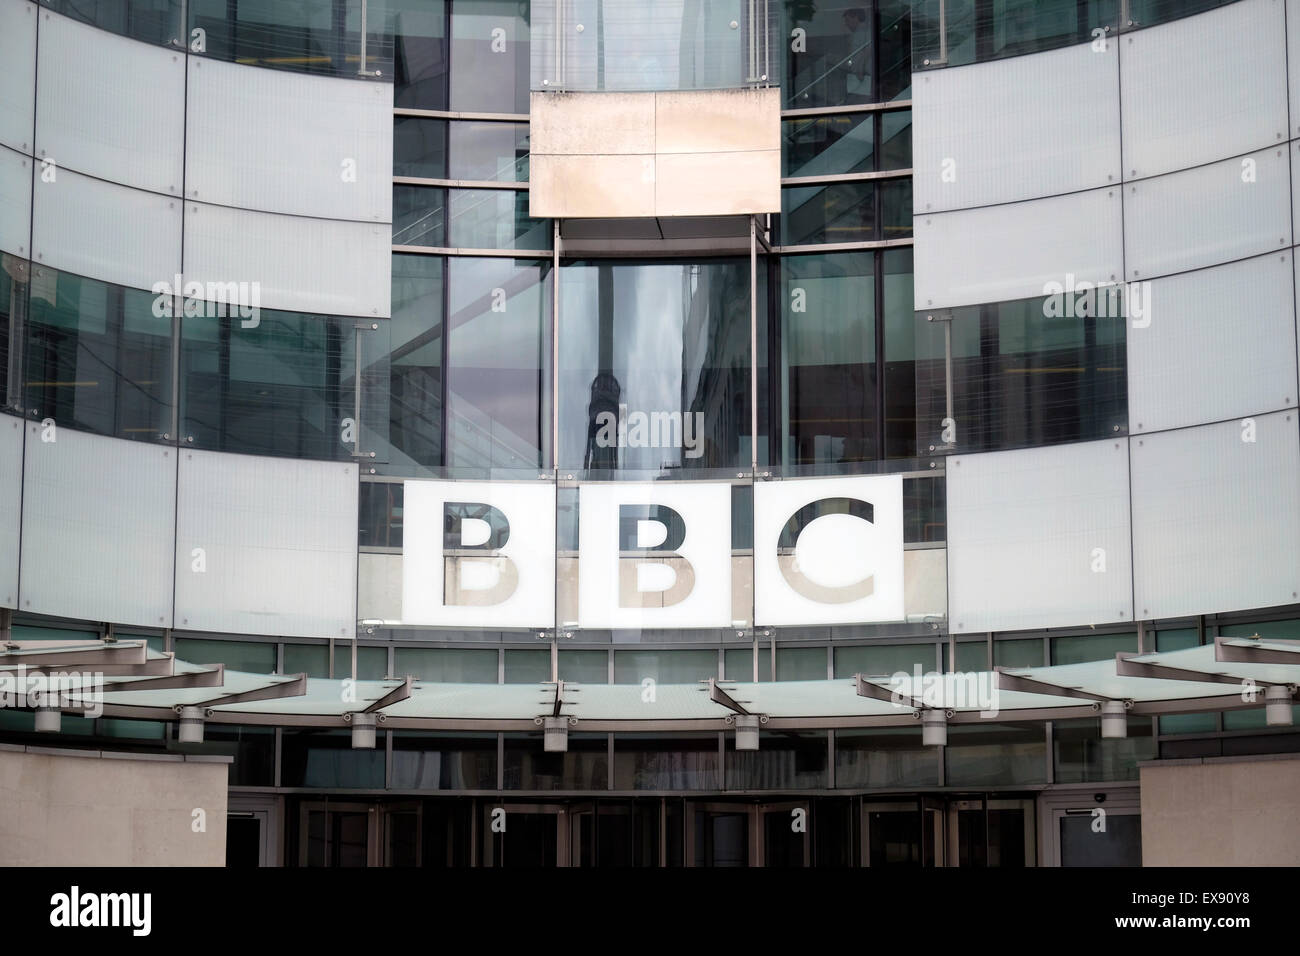 A close-up view of BBC in central London Stock Photo